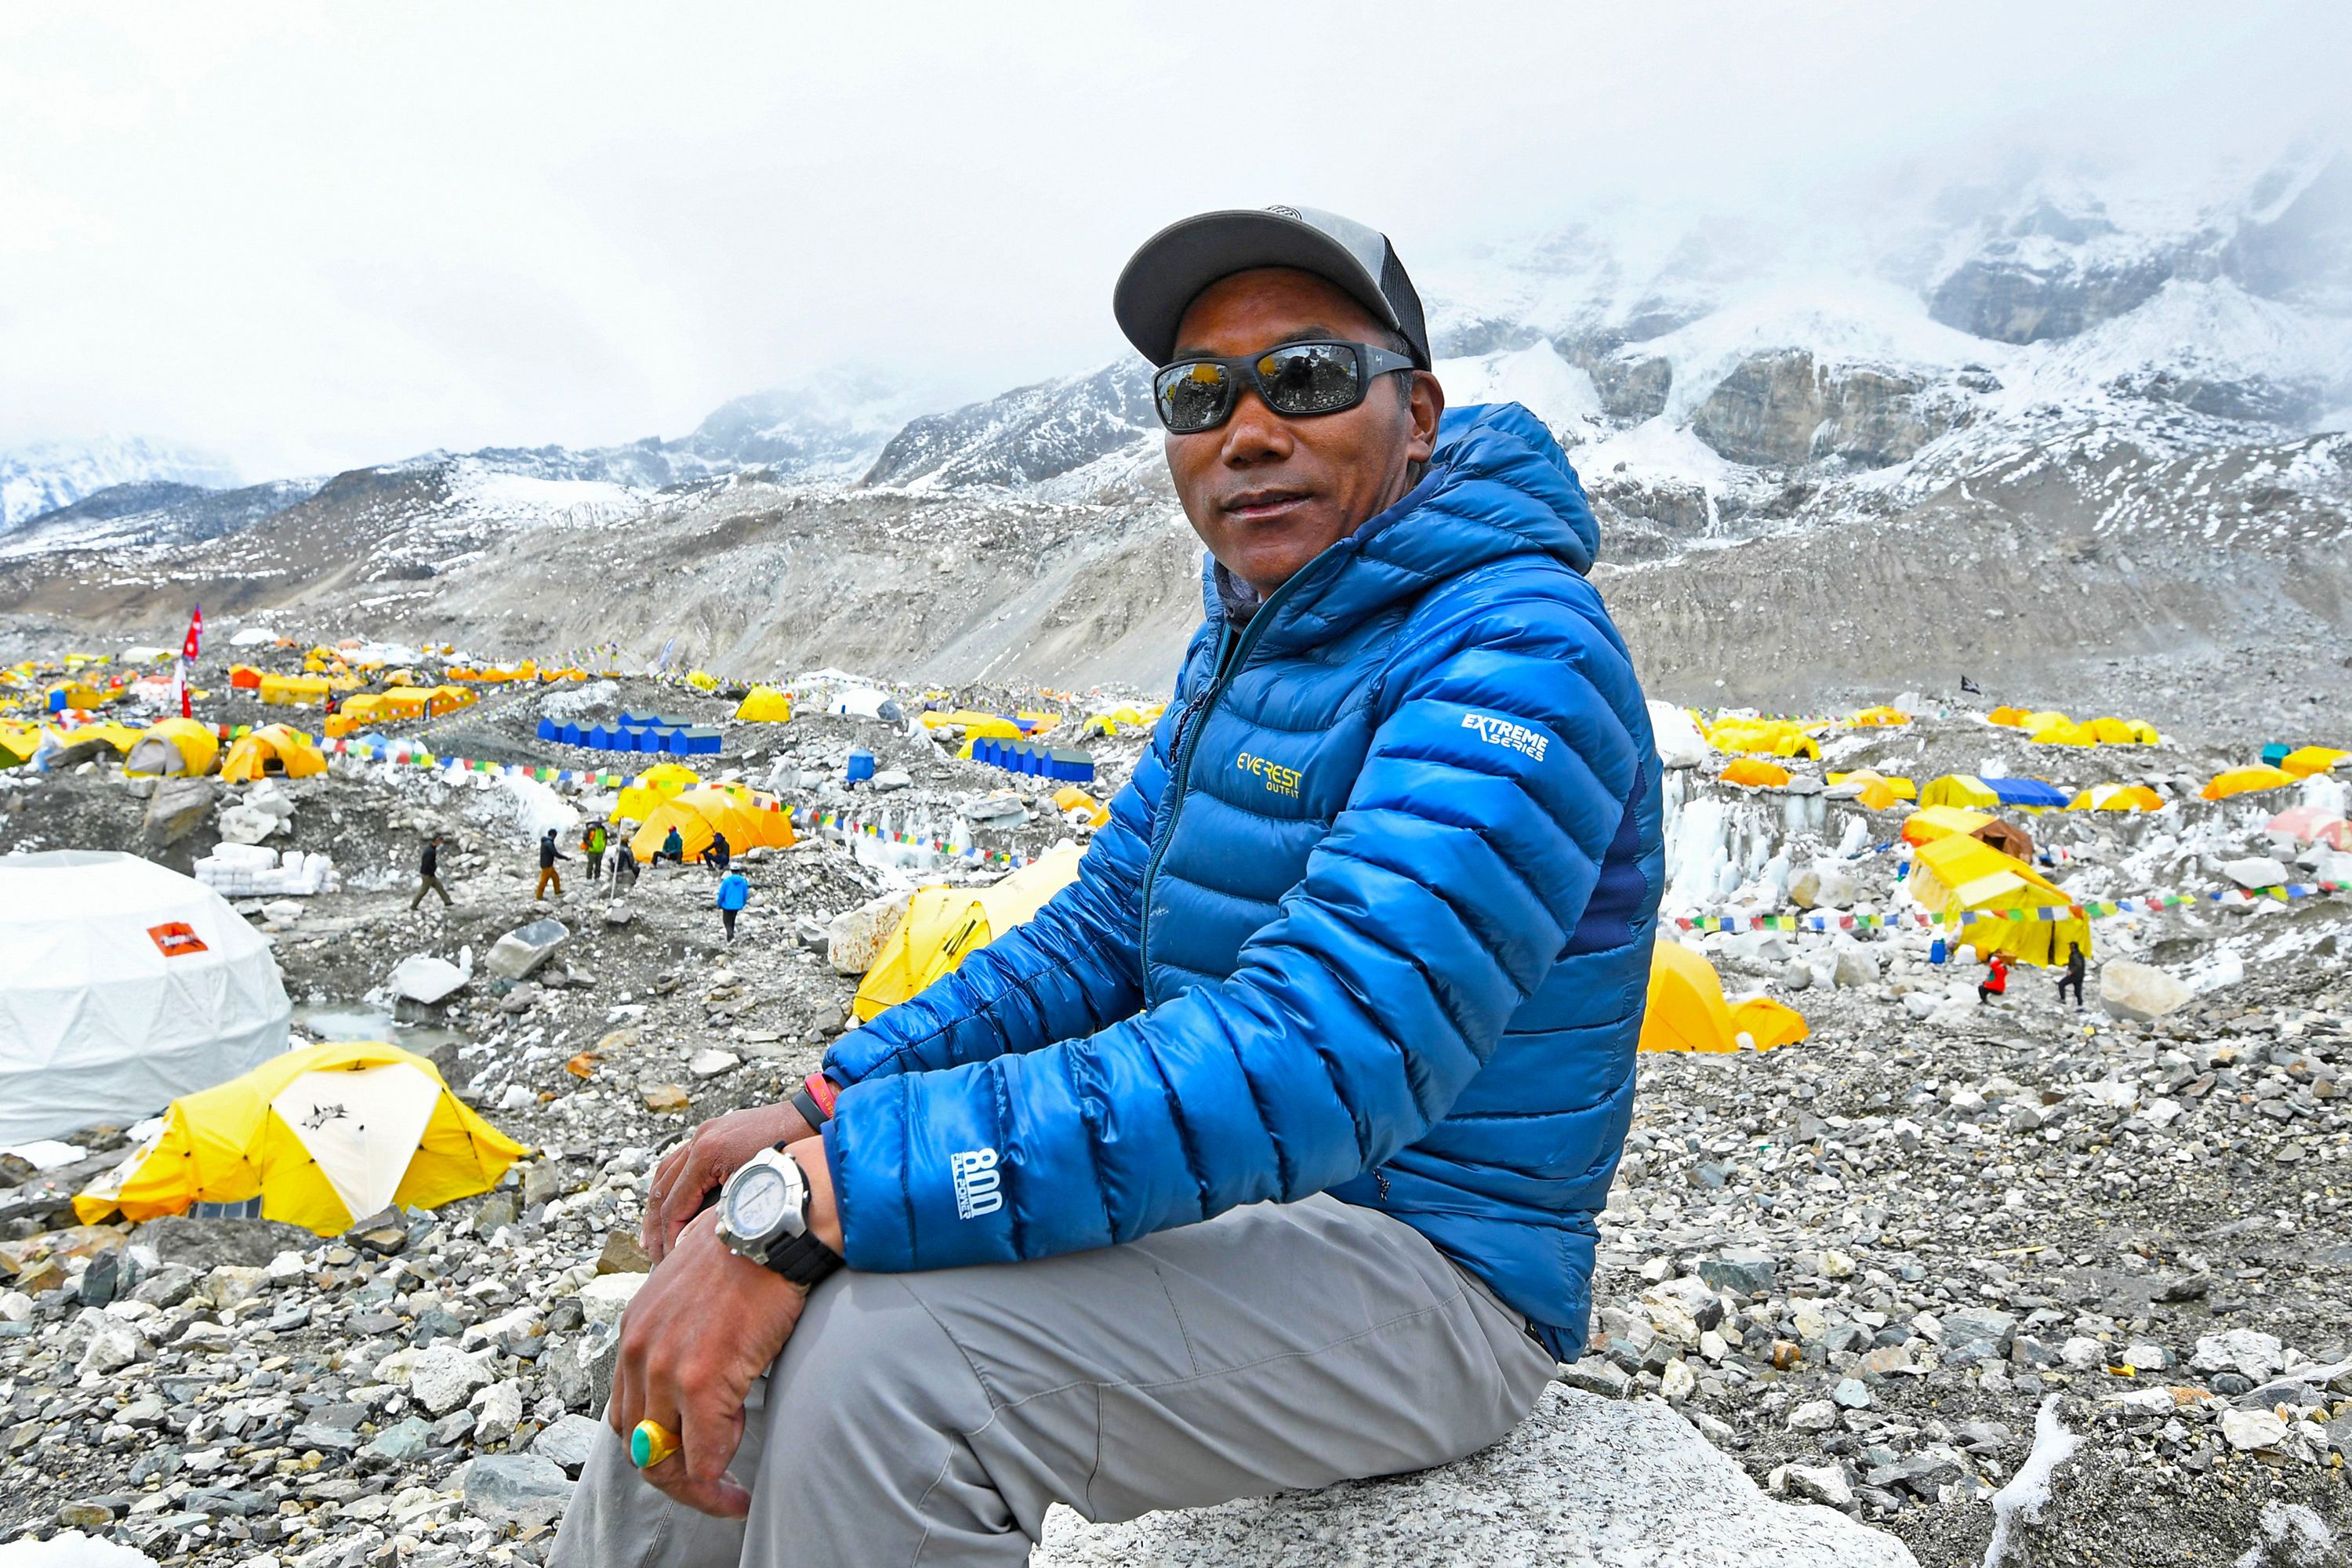 Nepali Sherpa breaks his own record again by scaling Everest 26 times, official says | CNN